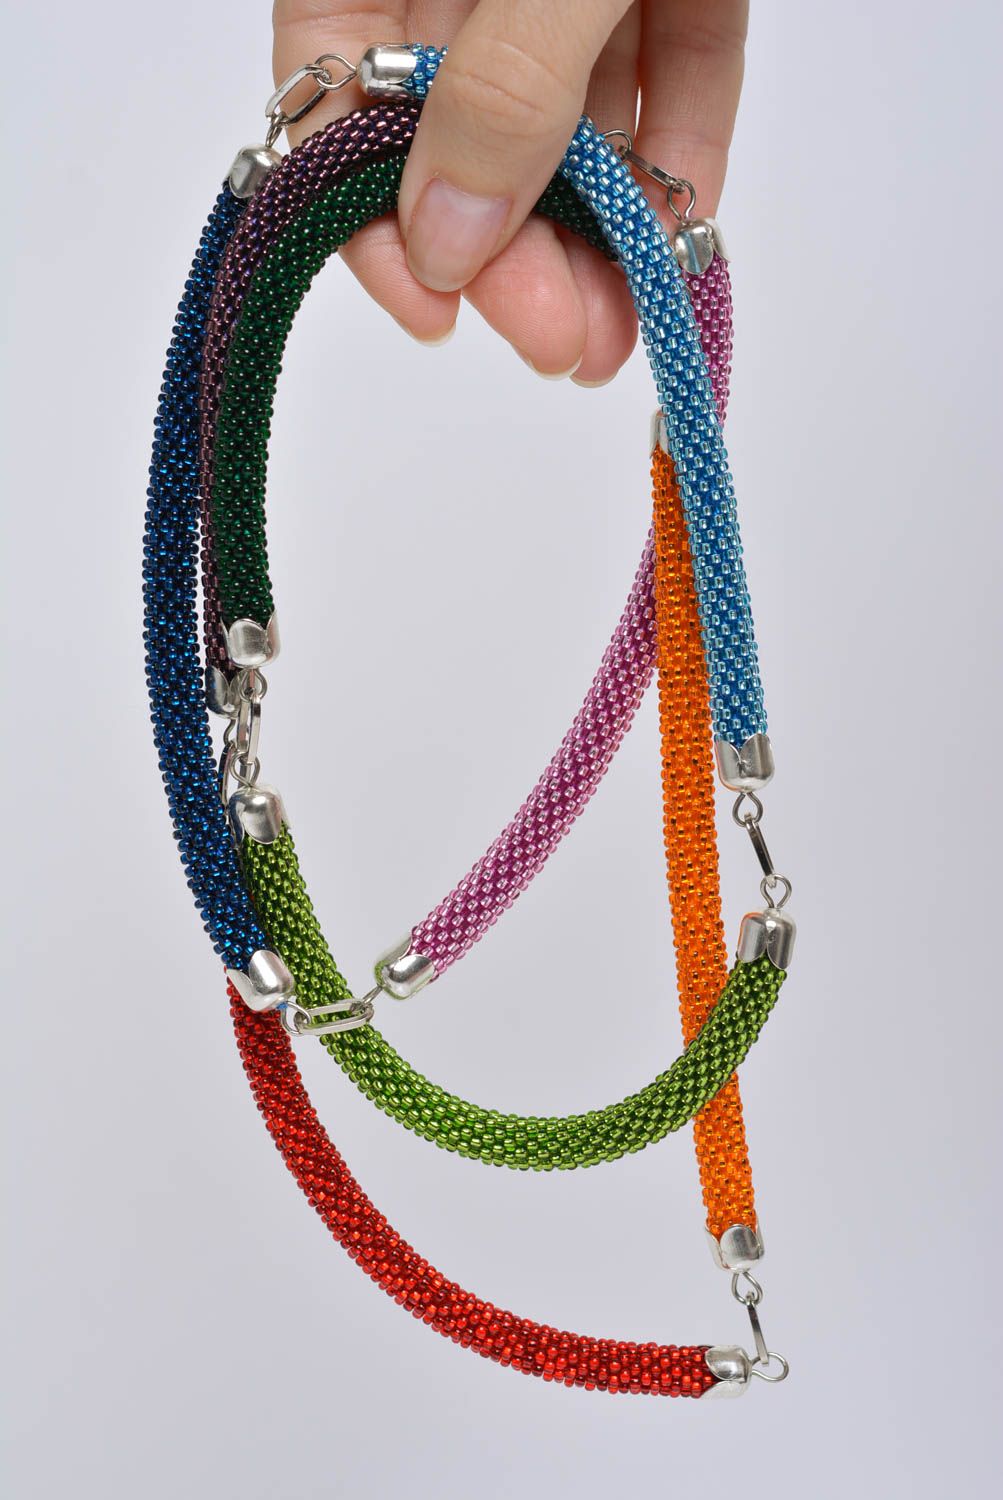 Handmade designer long bead woven cord necklace with bright colorful elements photo 3